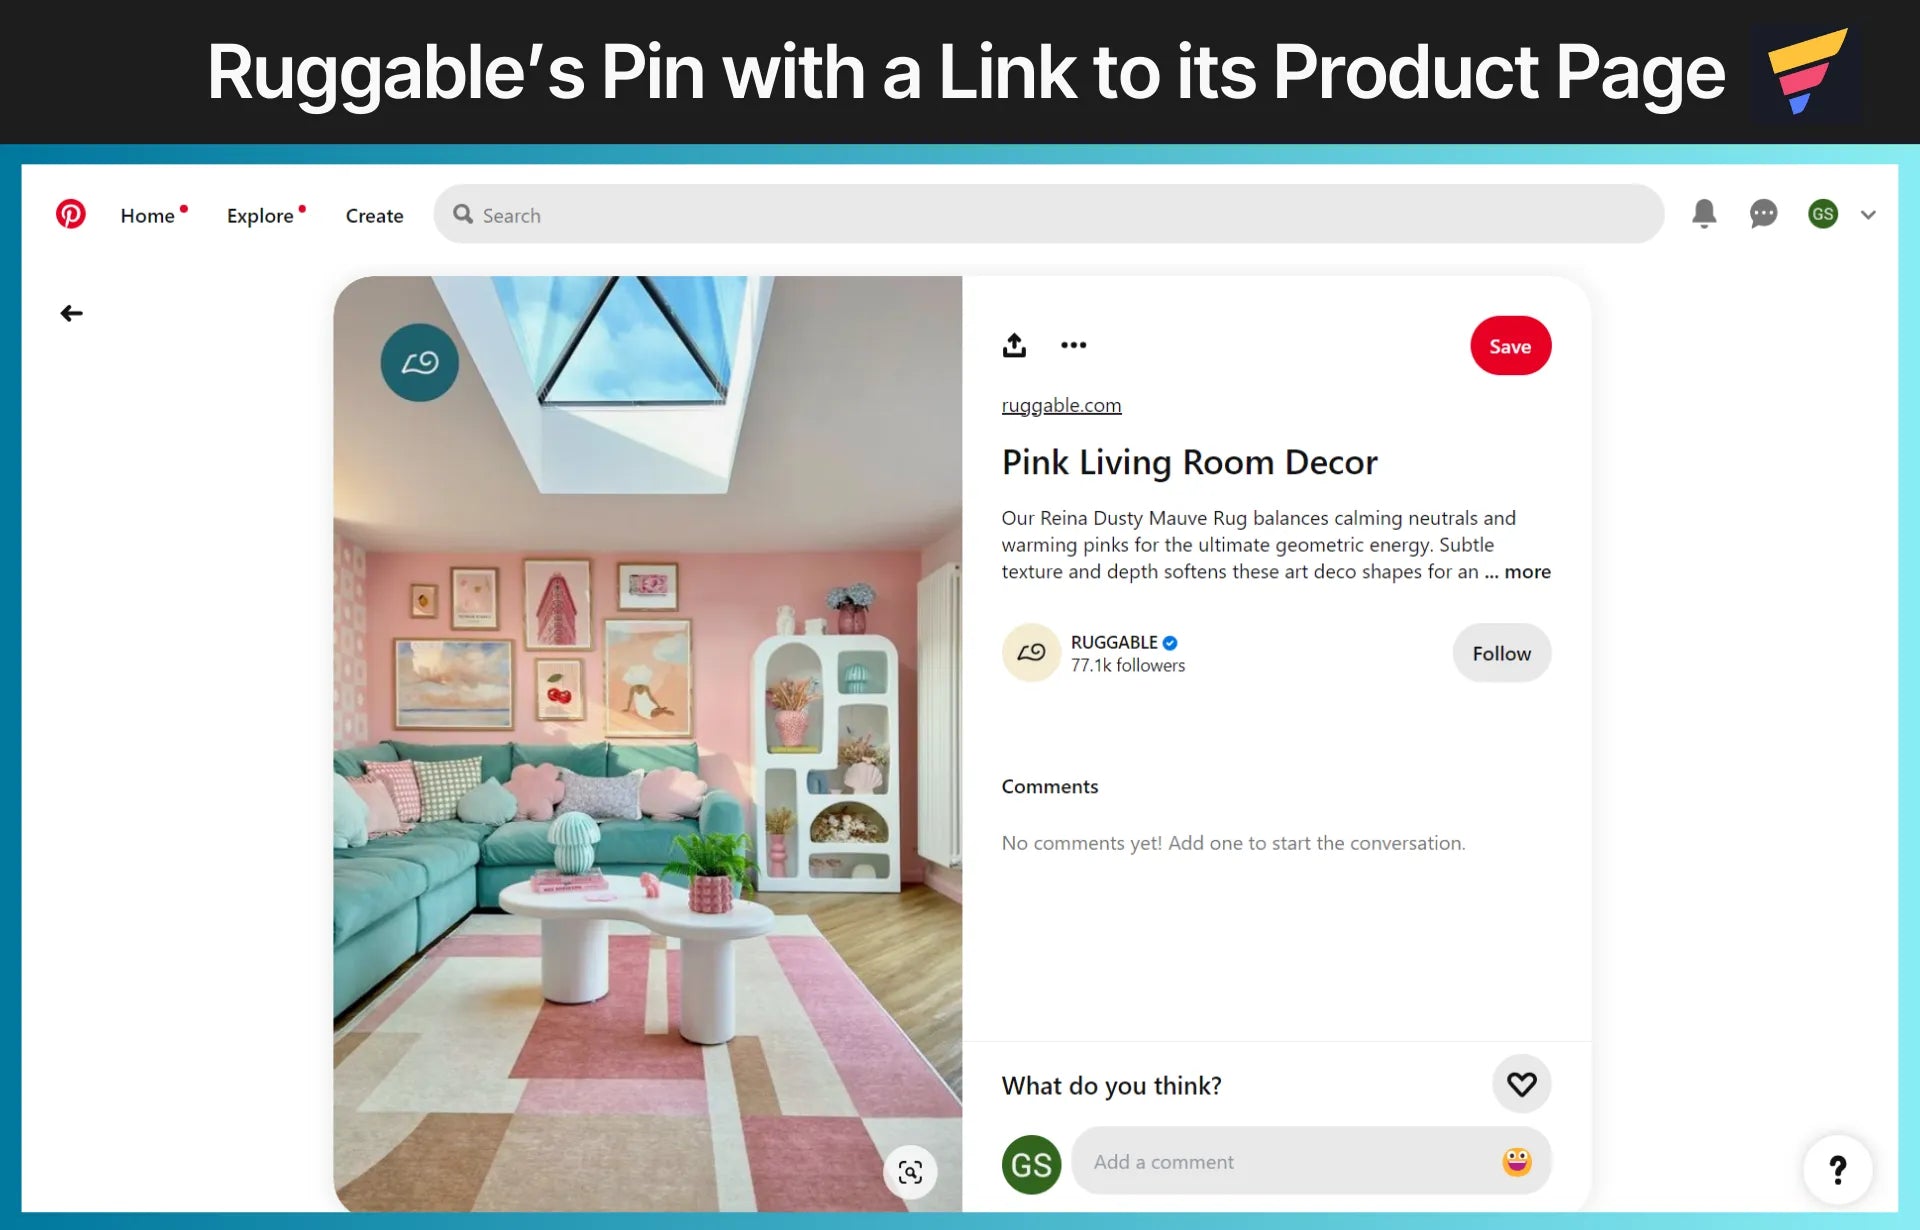 Ruggable’s Pin with a Link to its Product Page